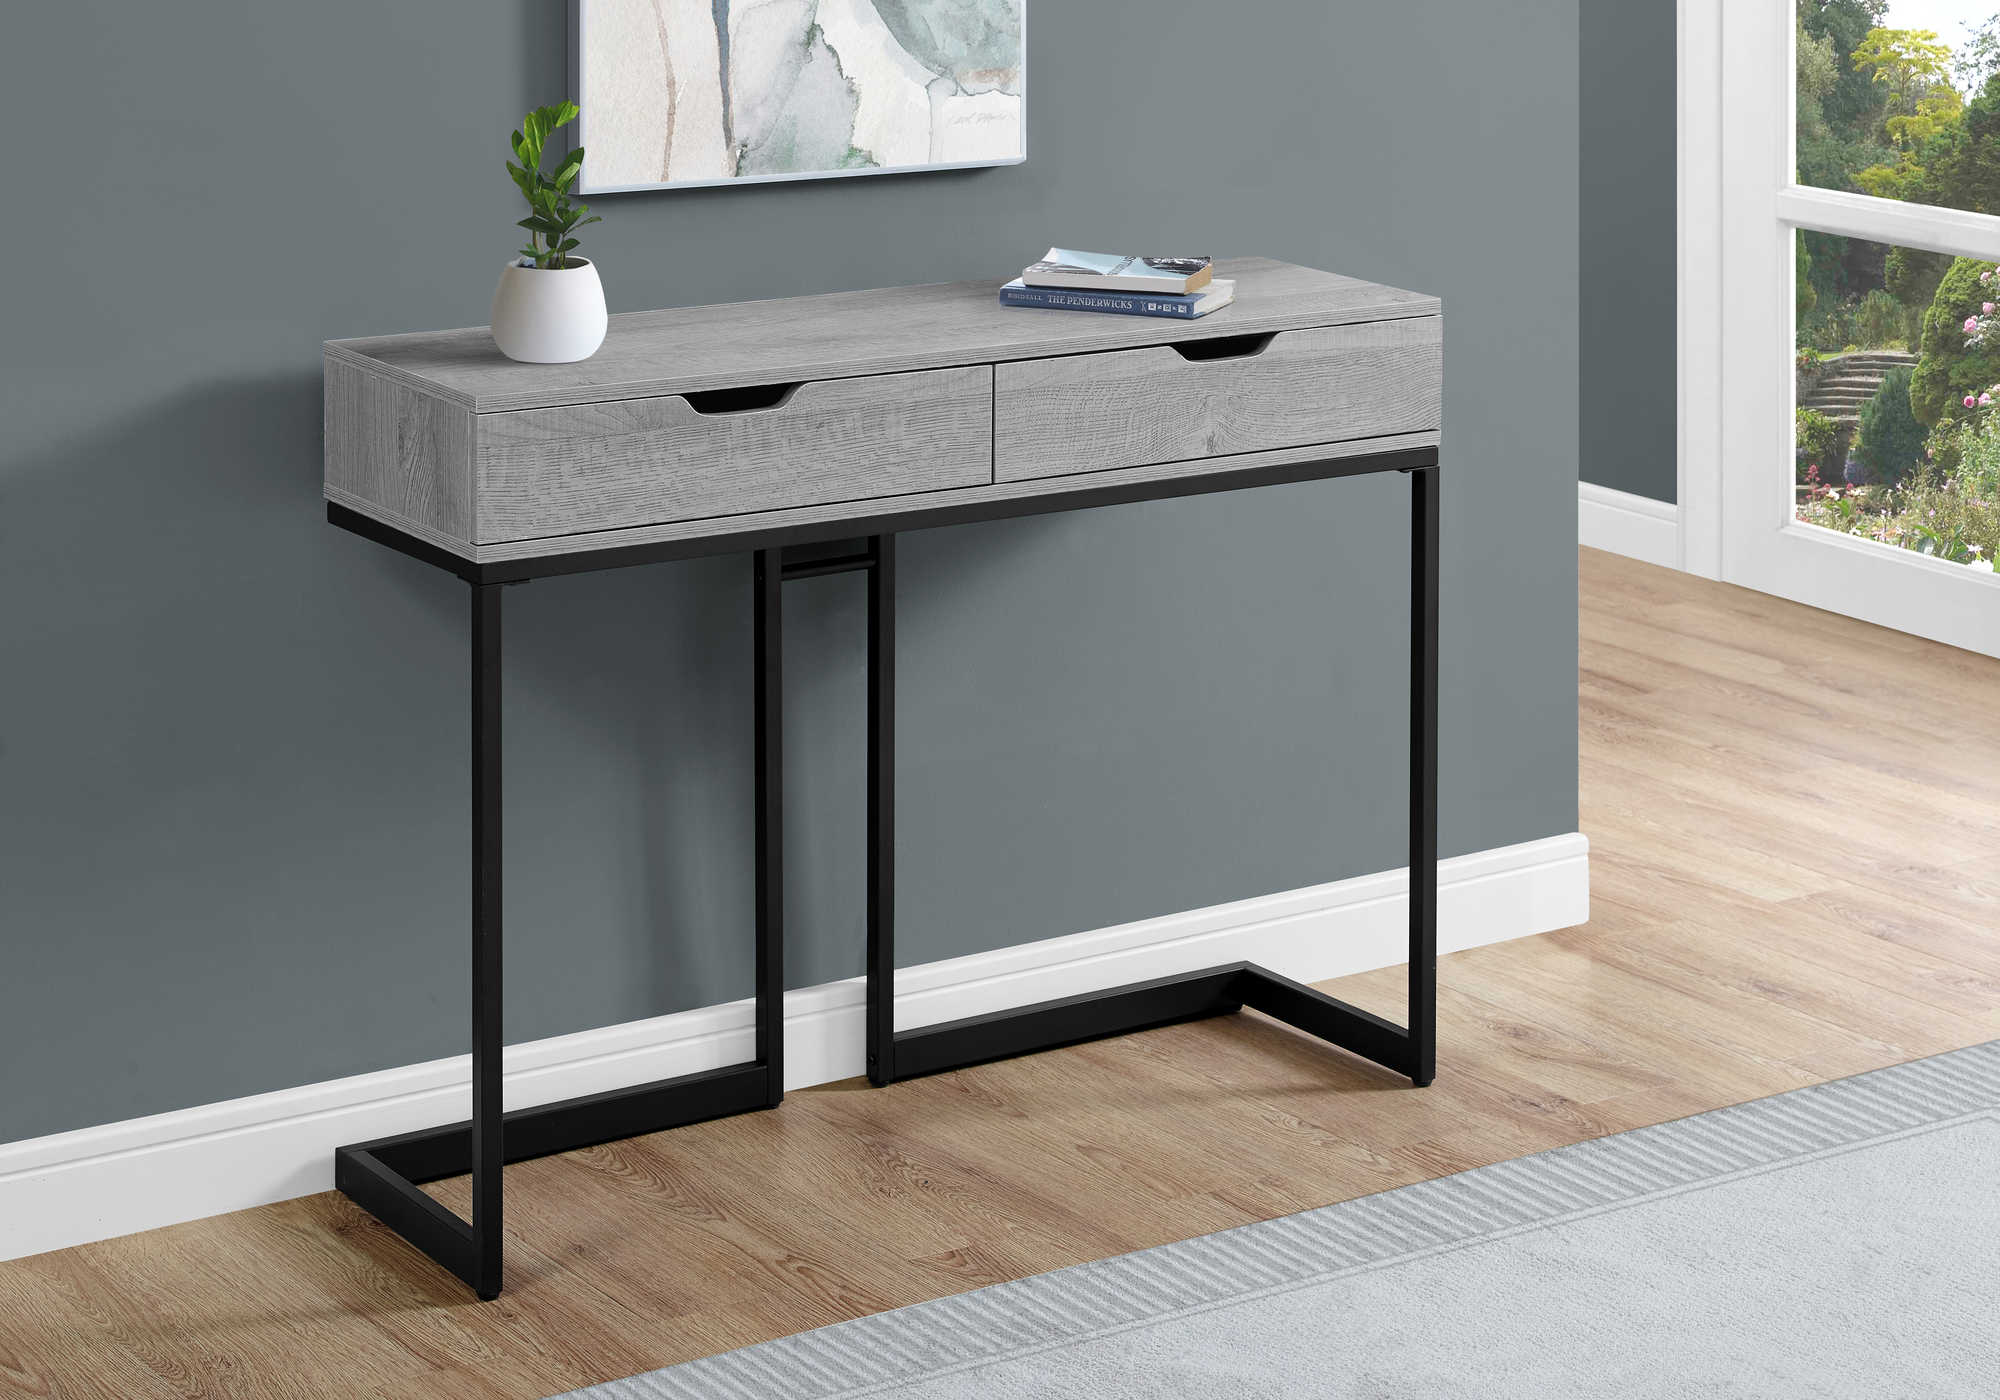 ACCENT TABLE - 42"L / GREY/ BLACK METAL HALL CONSOLE